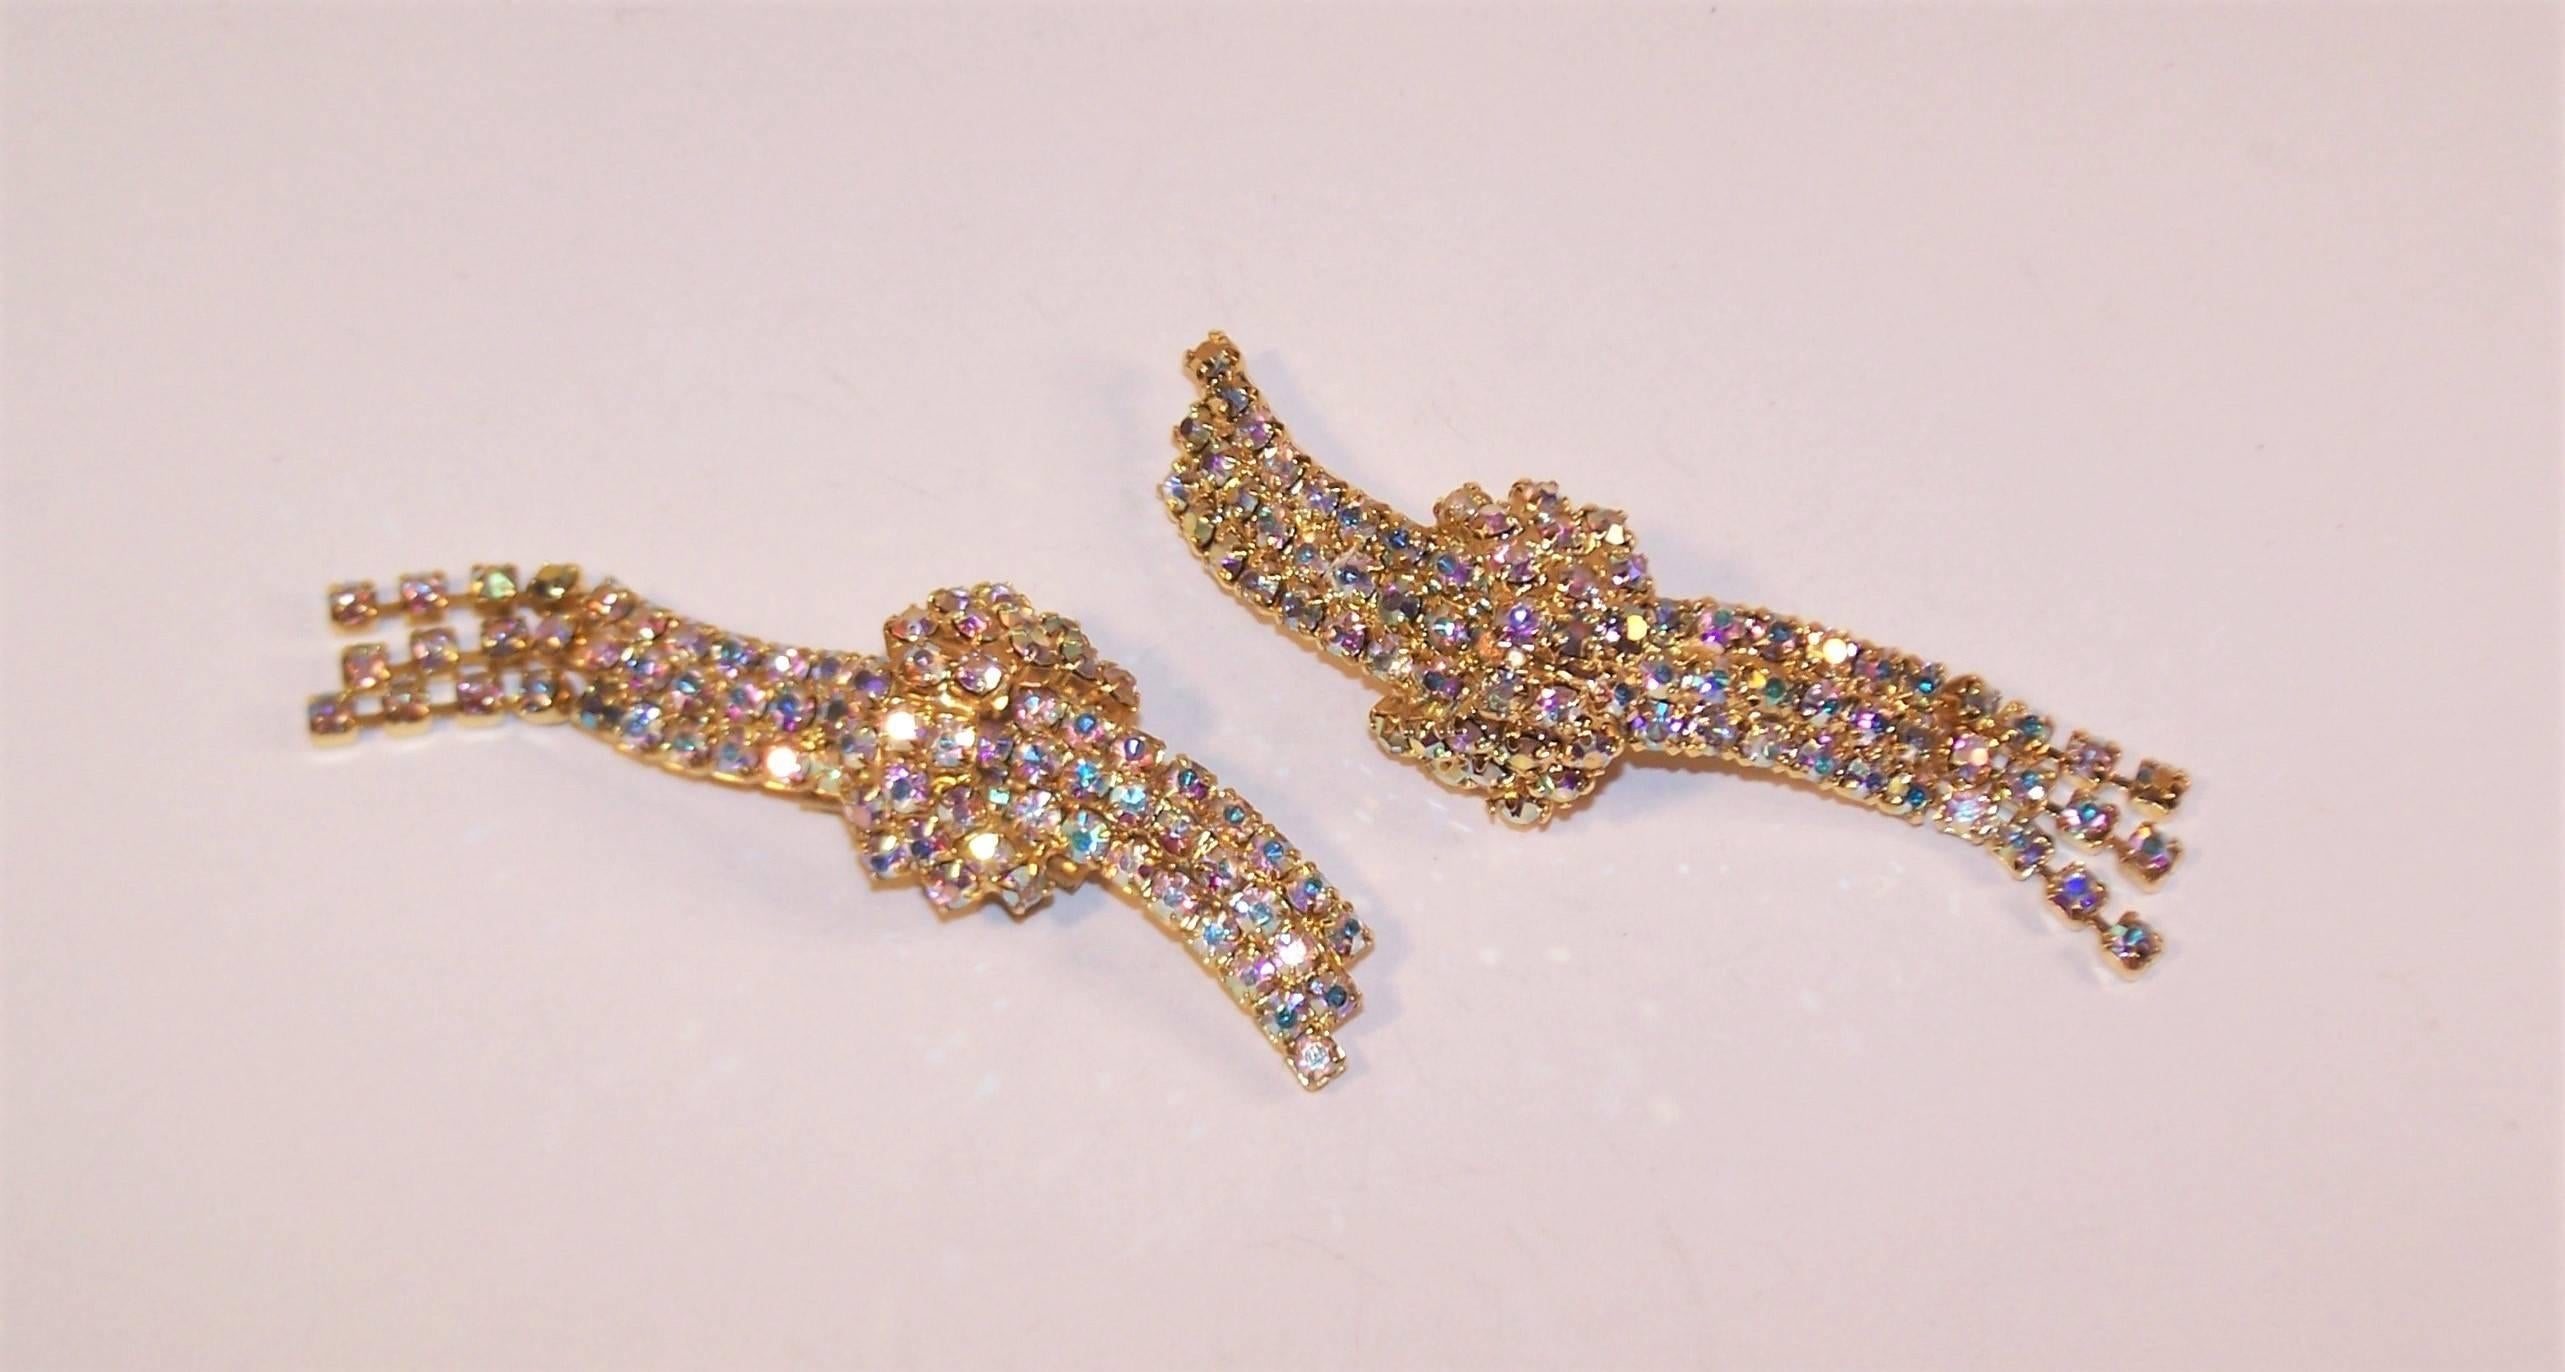 Old school shoe clips are a great idea to transform the look of a classic pump or add a little pizzaz to an evening look.  These clips have the added bonus of a serpentine shape with articulated dangles and aurora borealis rhinestones that look good